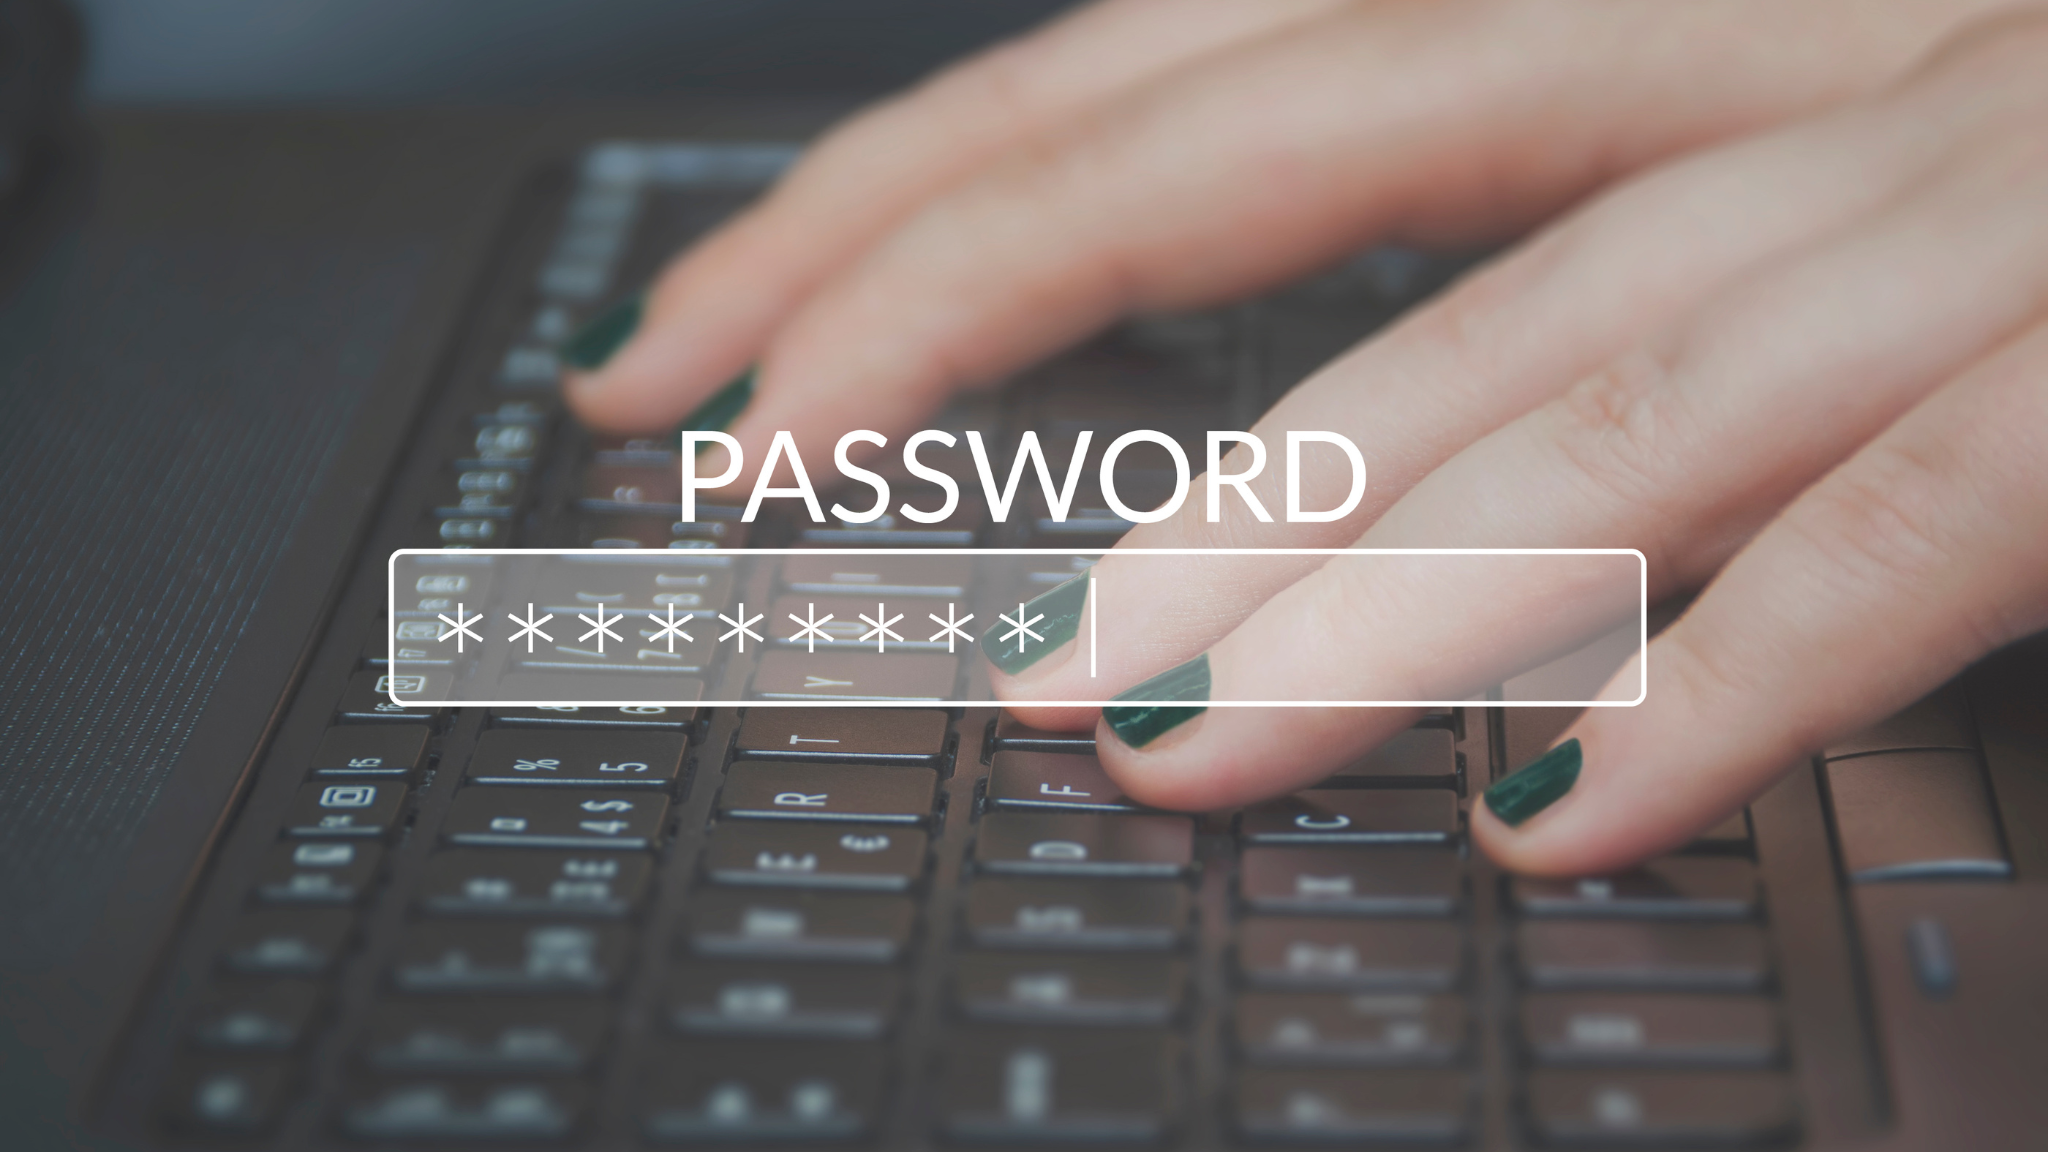 Are You Ready to Up Your Password Game on Change Your Password Day?